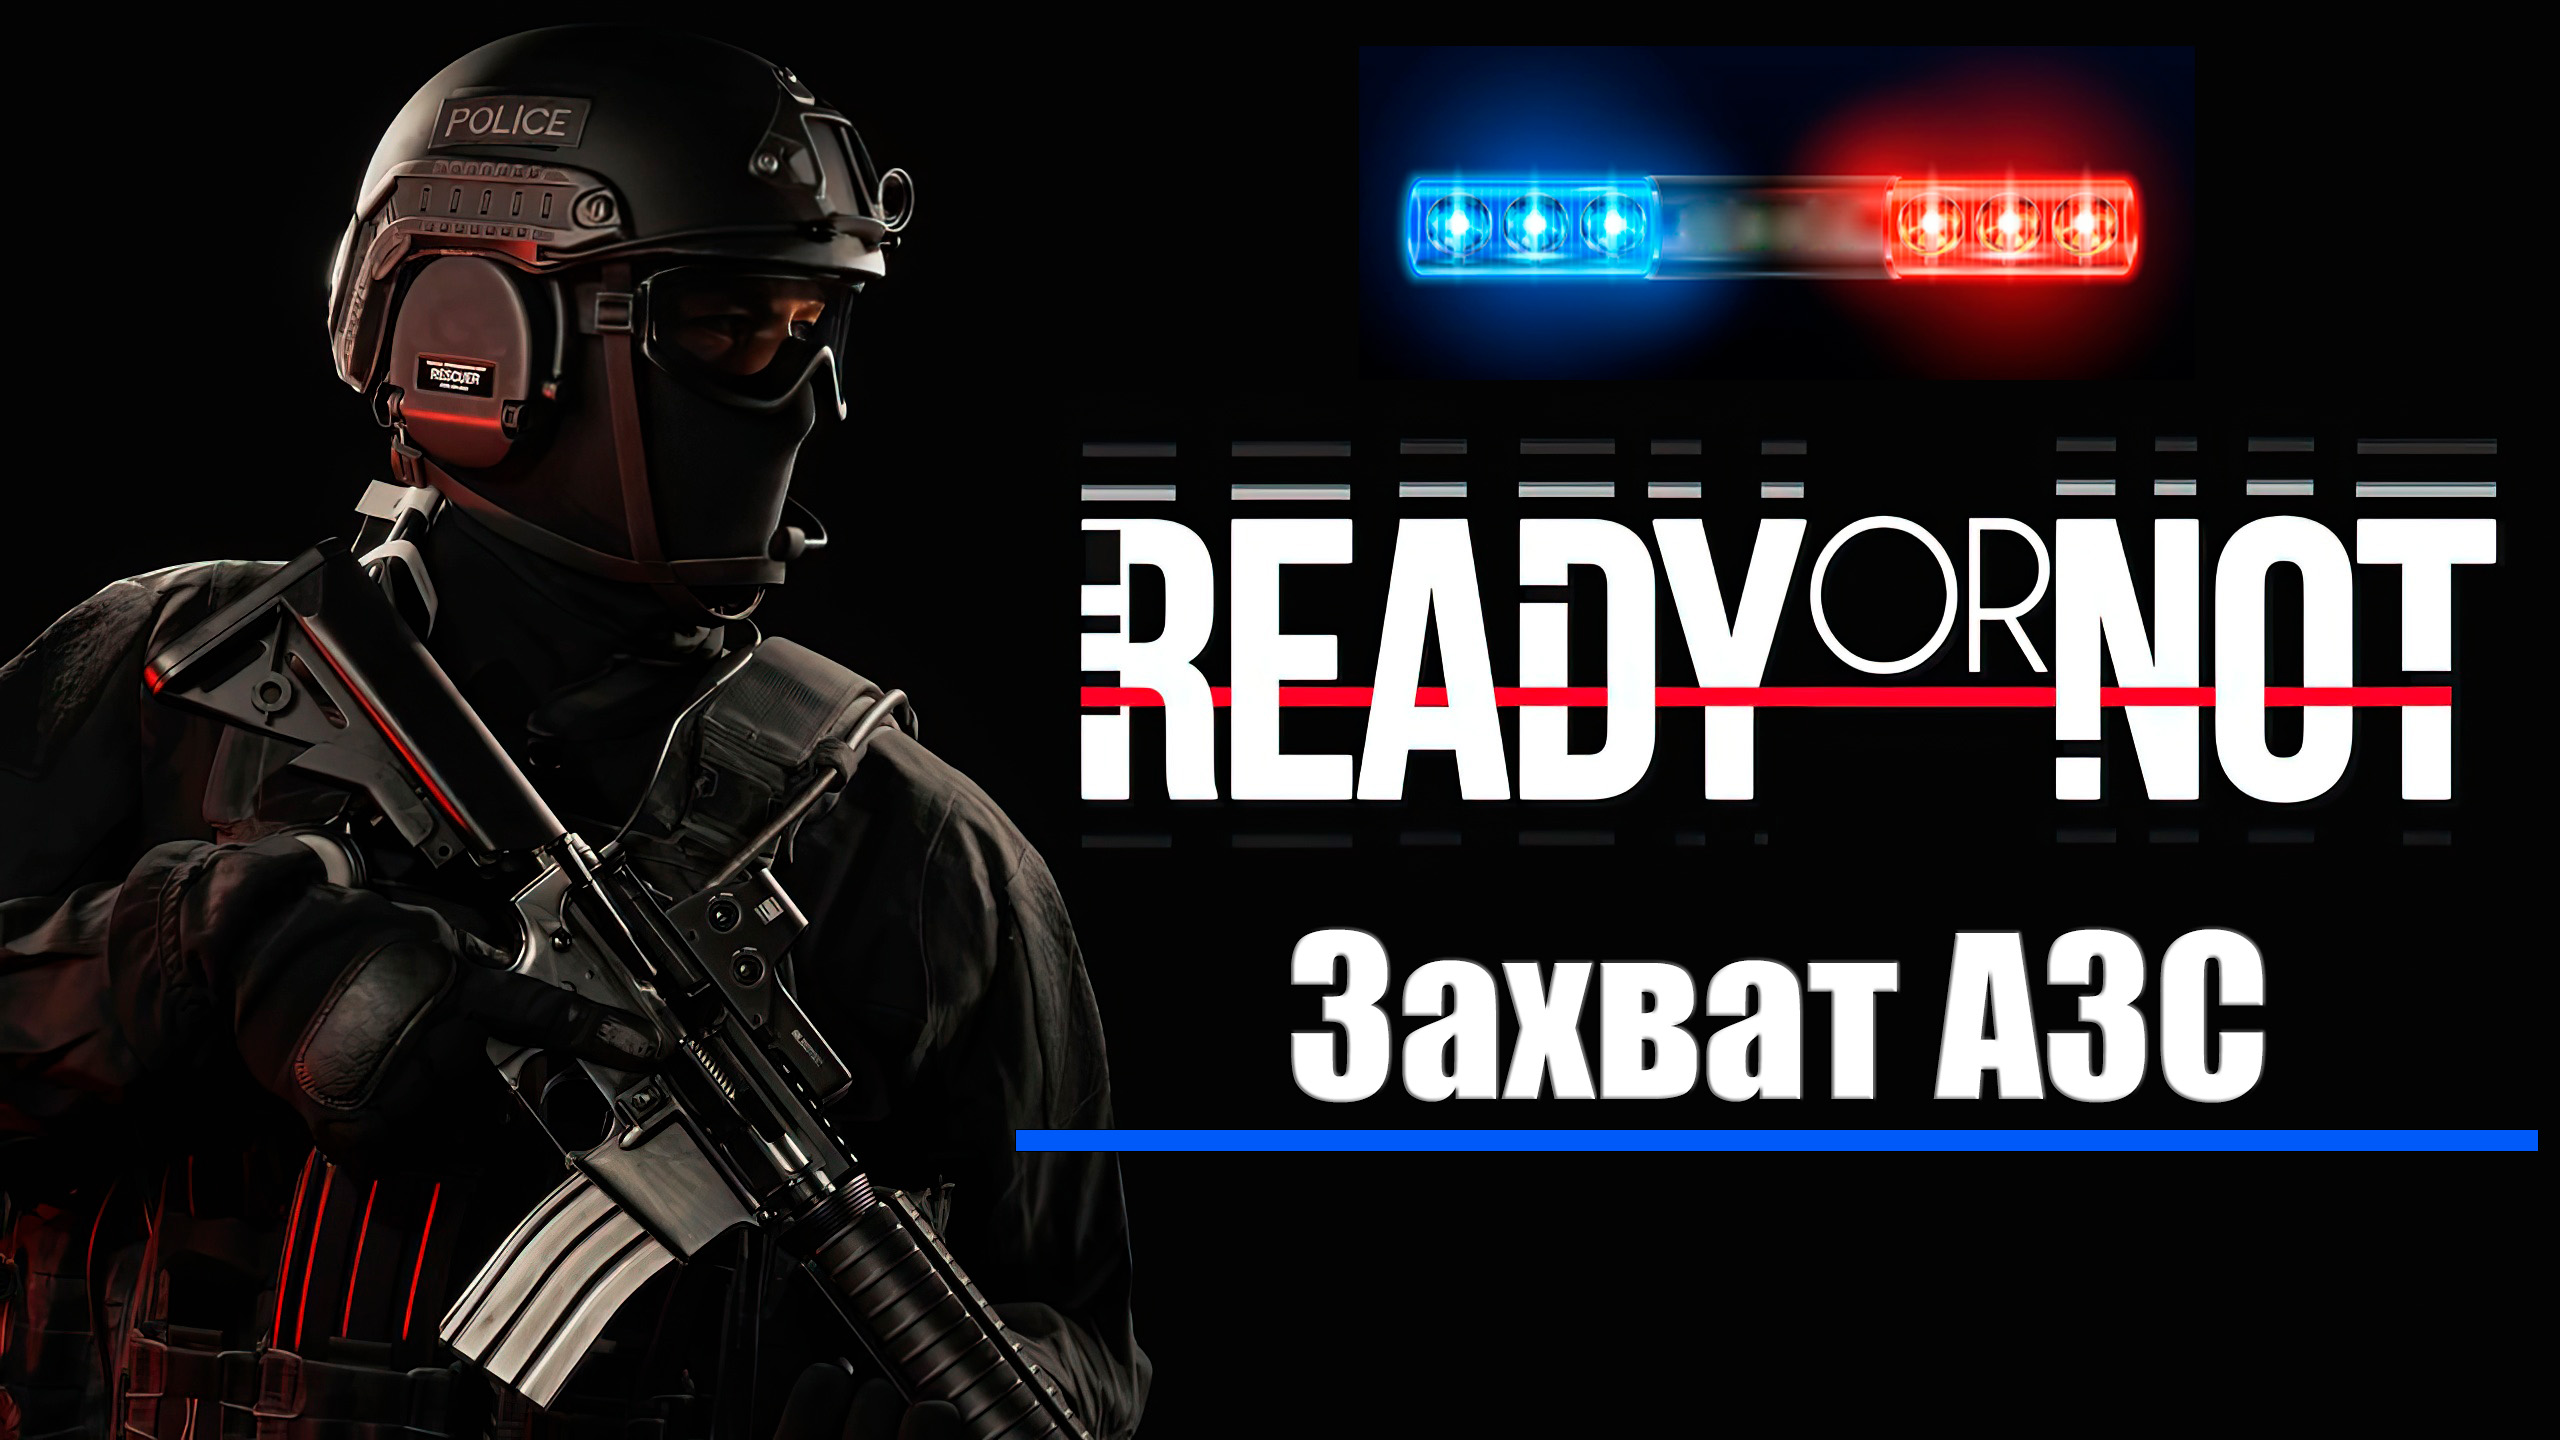 Ready or not игра. SWAT 4 АЗС. Ready or not карты. Обои еа телефон Redi or not. Ready or not язык